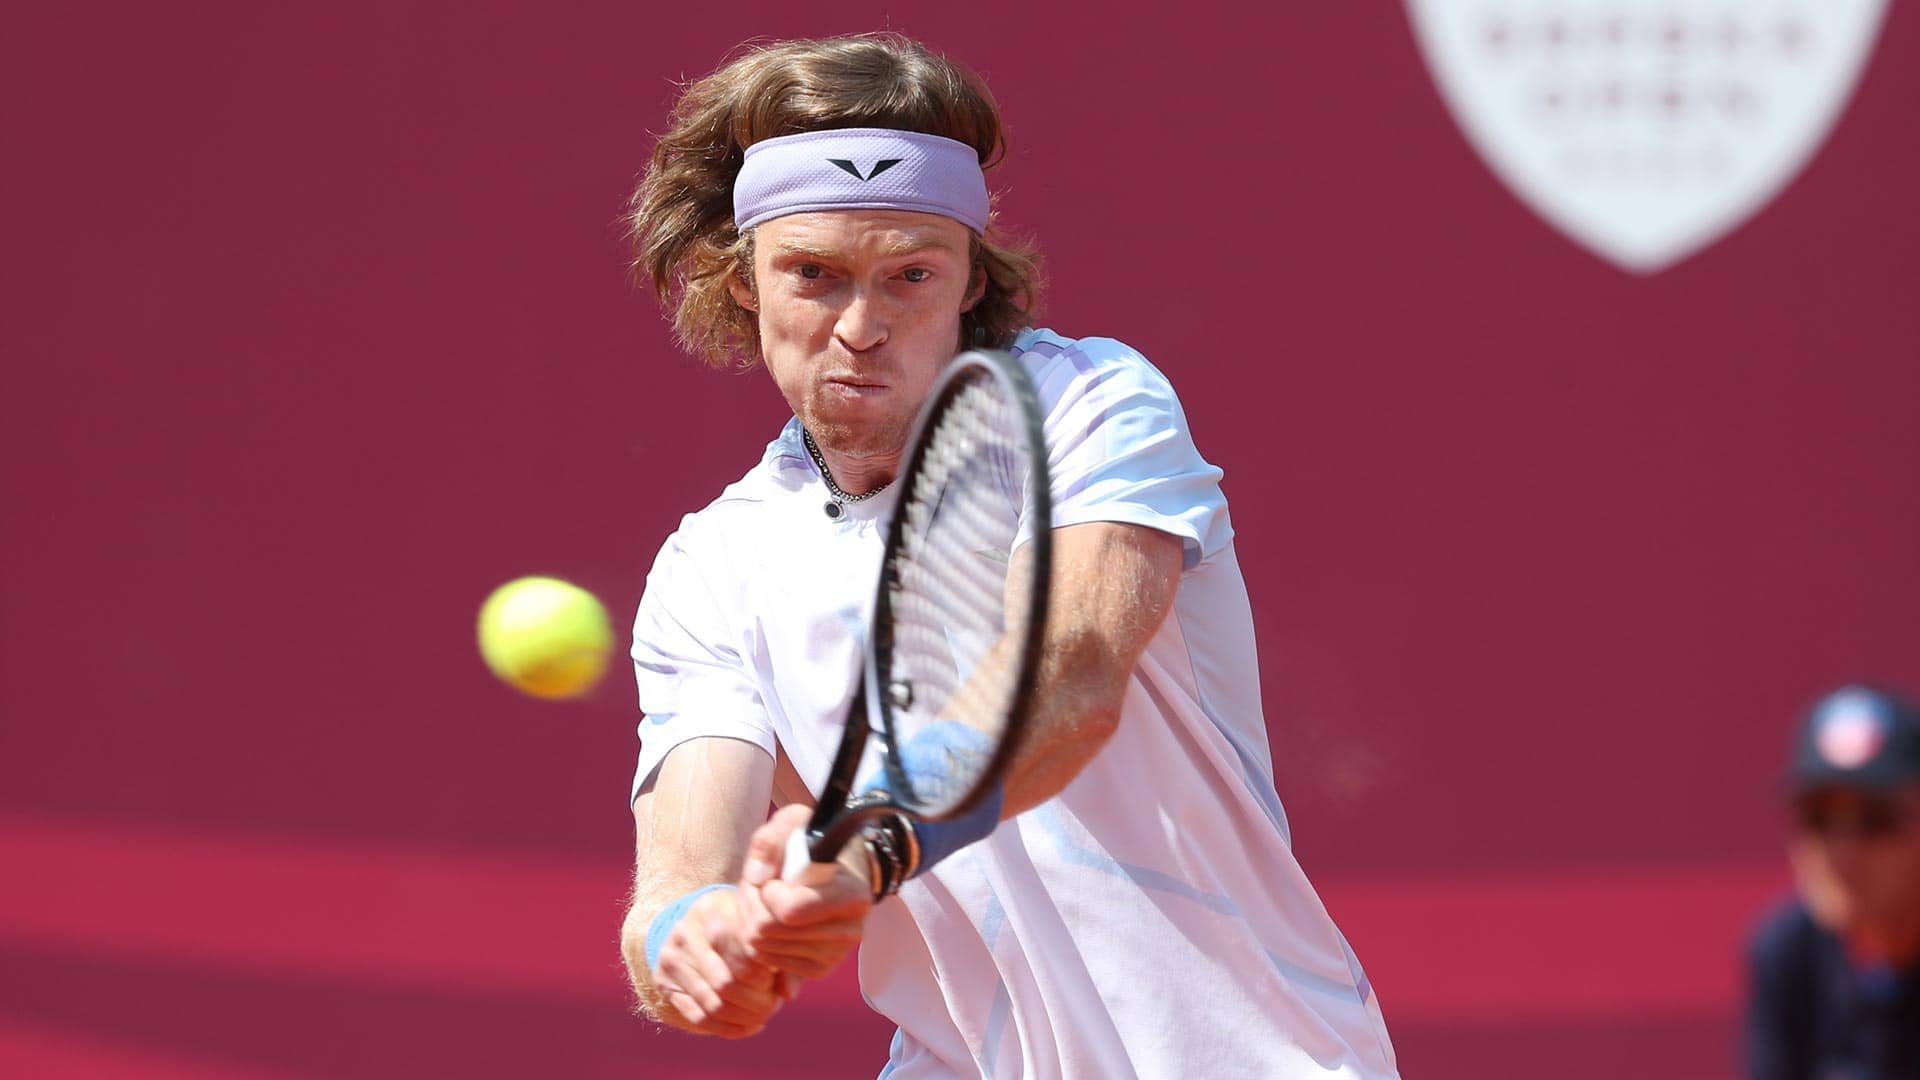 Andrey Rublev is chasing his 14th tour-level title this week.